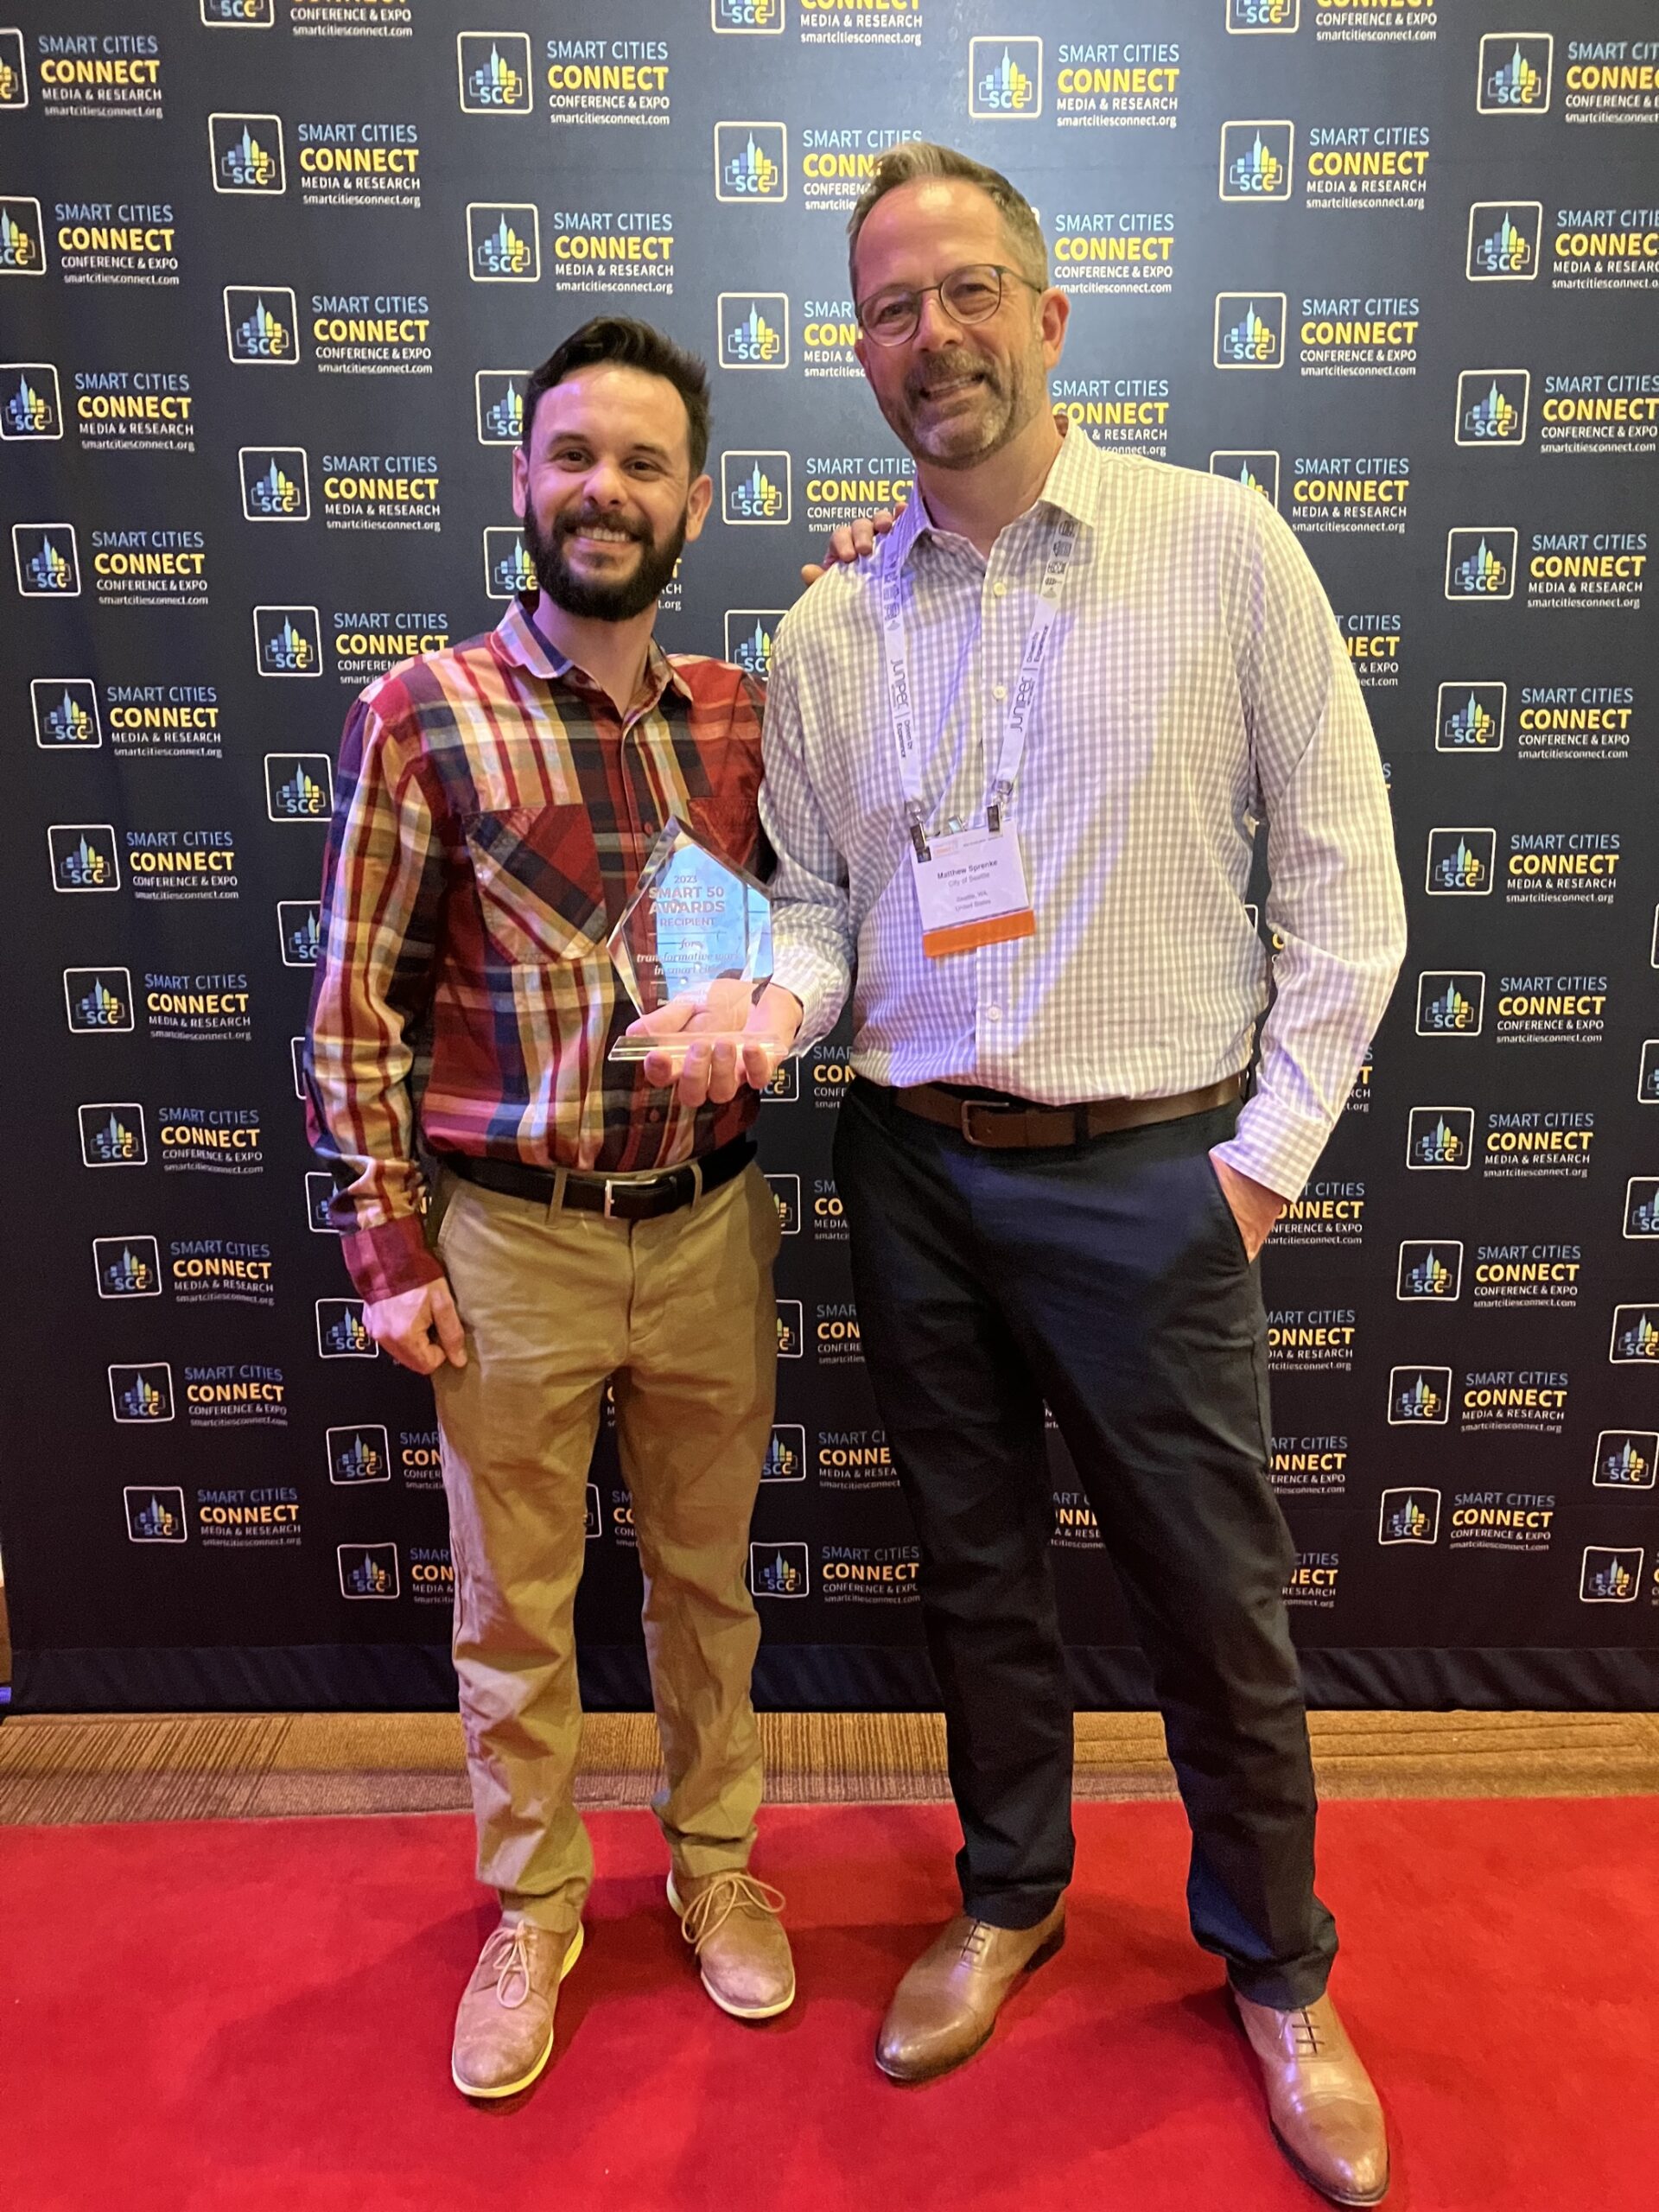 Seattle employees Miguel Jimenez and Matthew Sprenke smile from the red carpet with the Smart Cities Connect Award